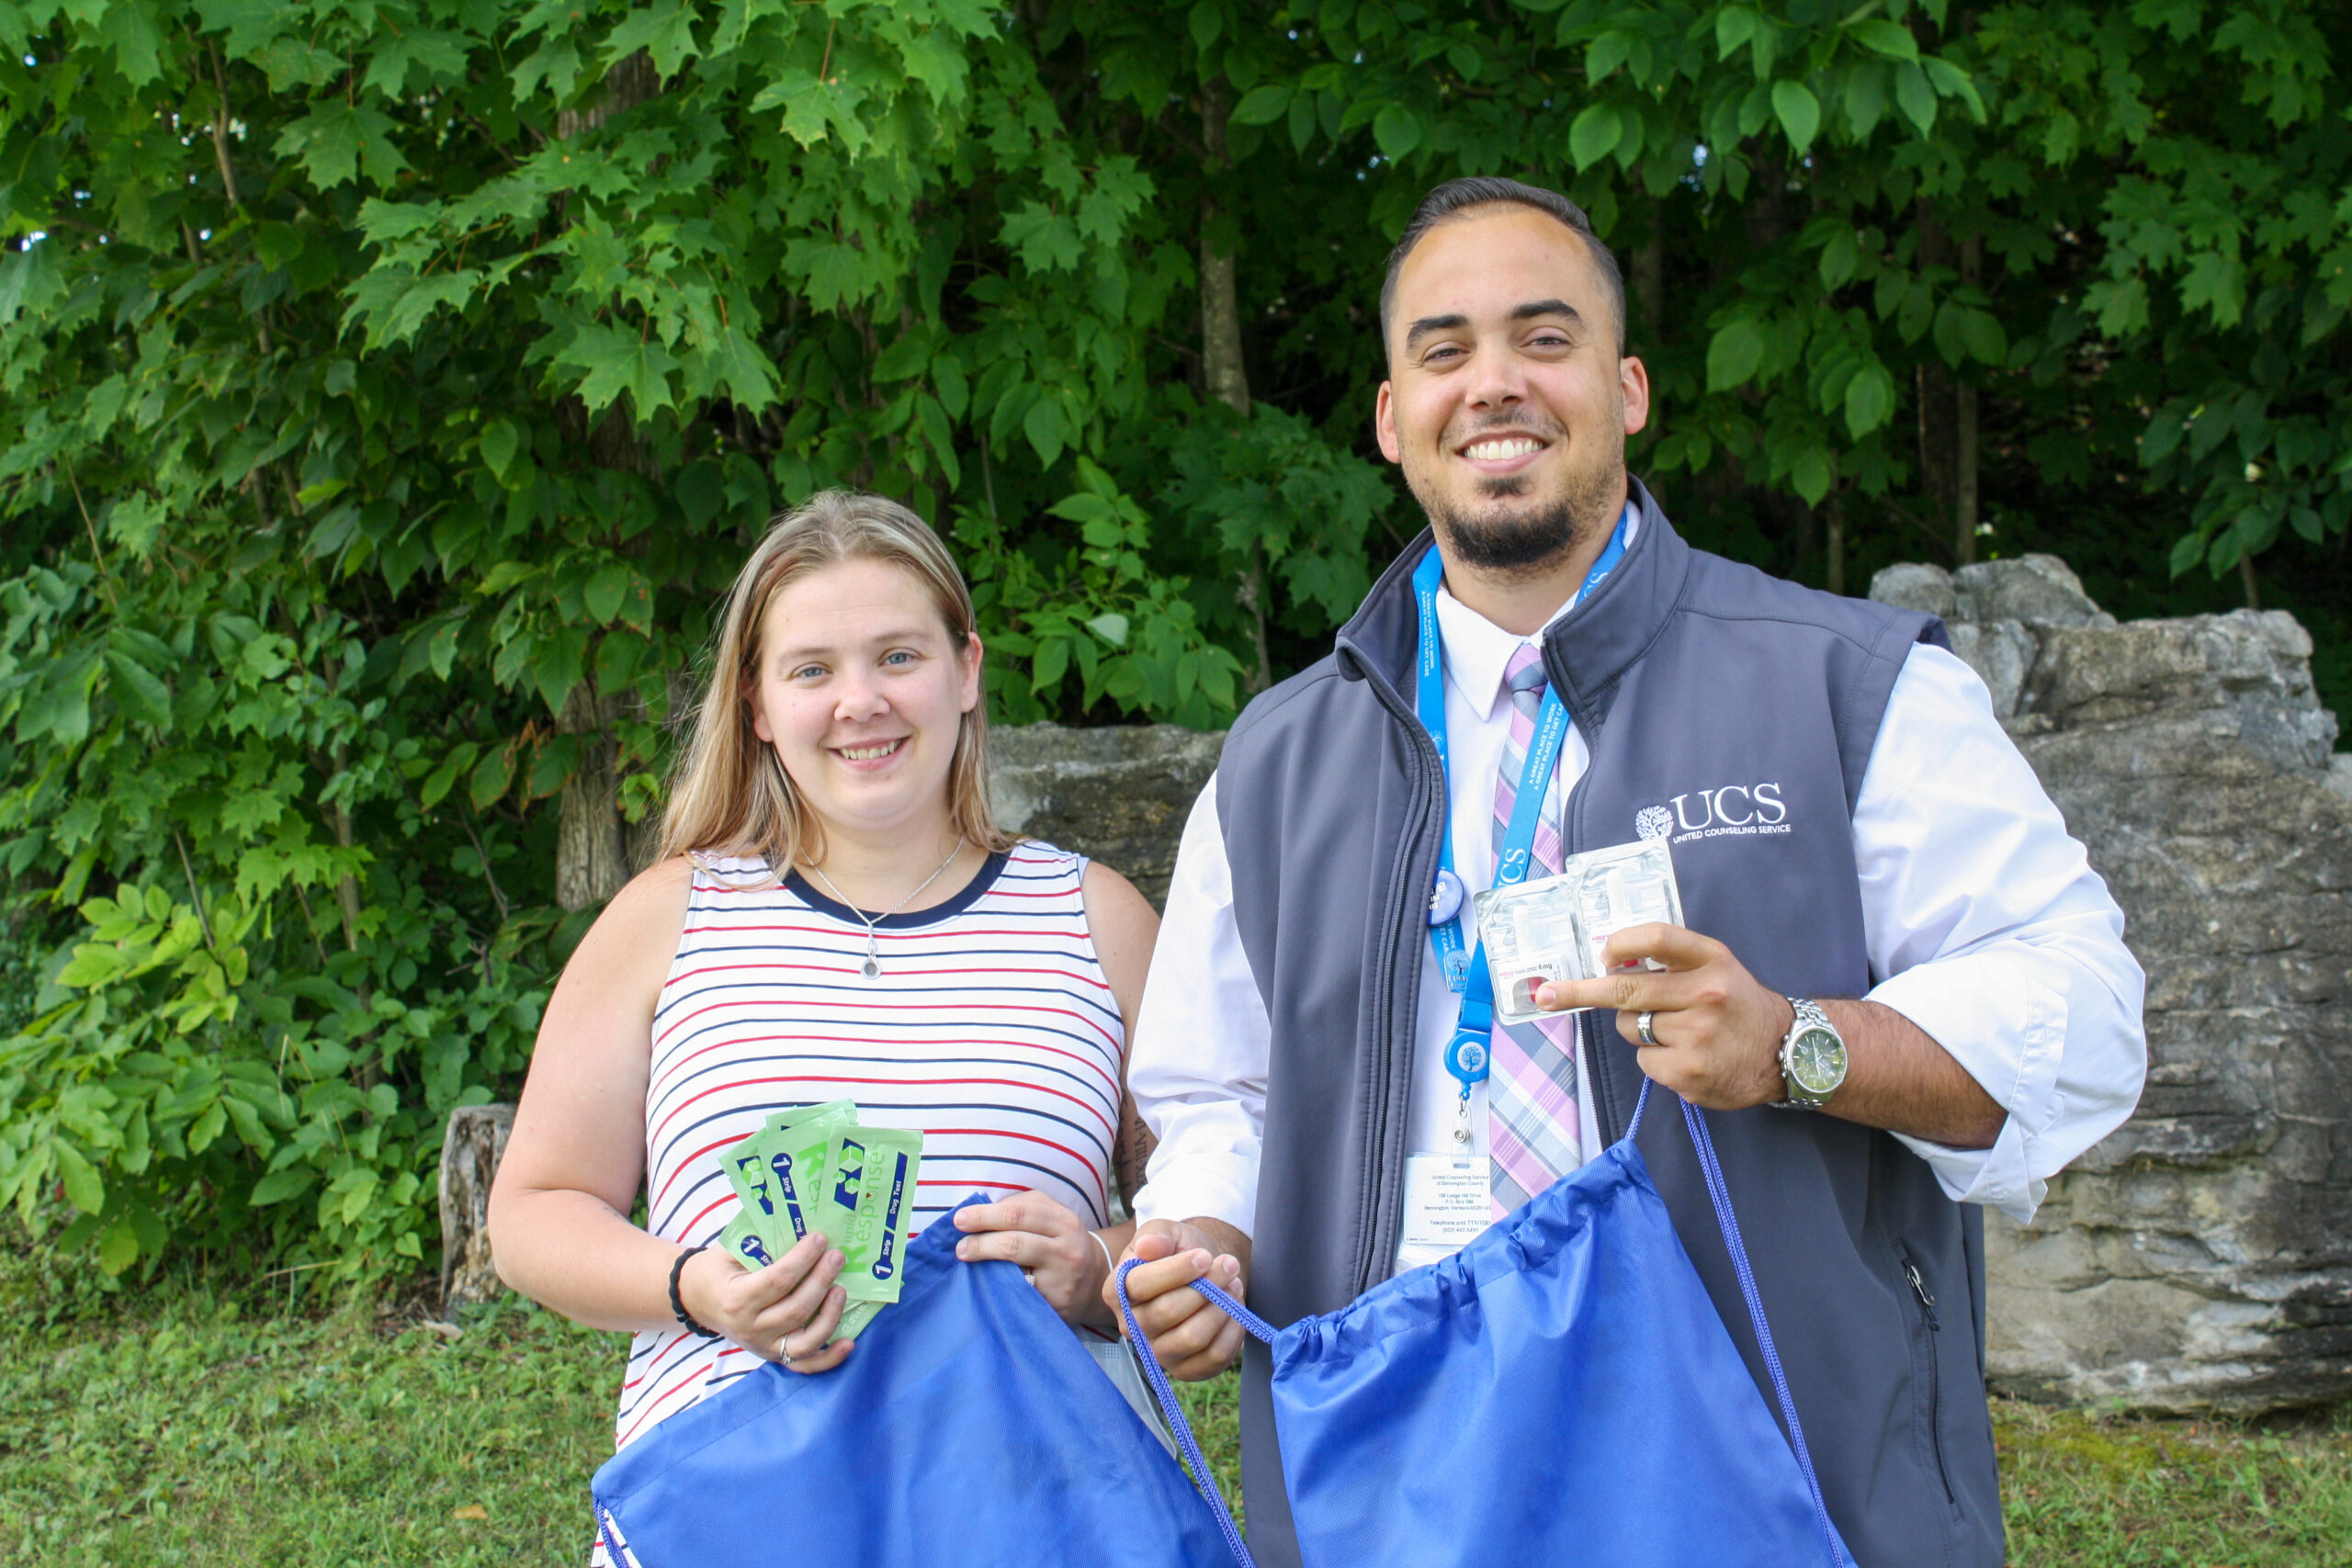 A smiling young white woman in a striped tank top and a smiling Latino man in a fleece vest stand next to each other holding blue bags and paper coupons